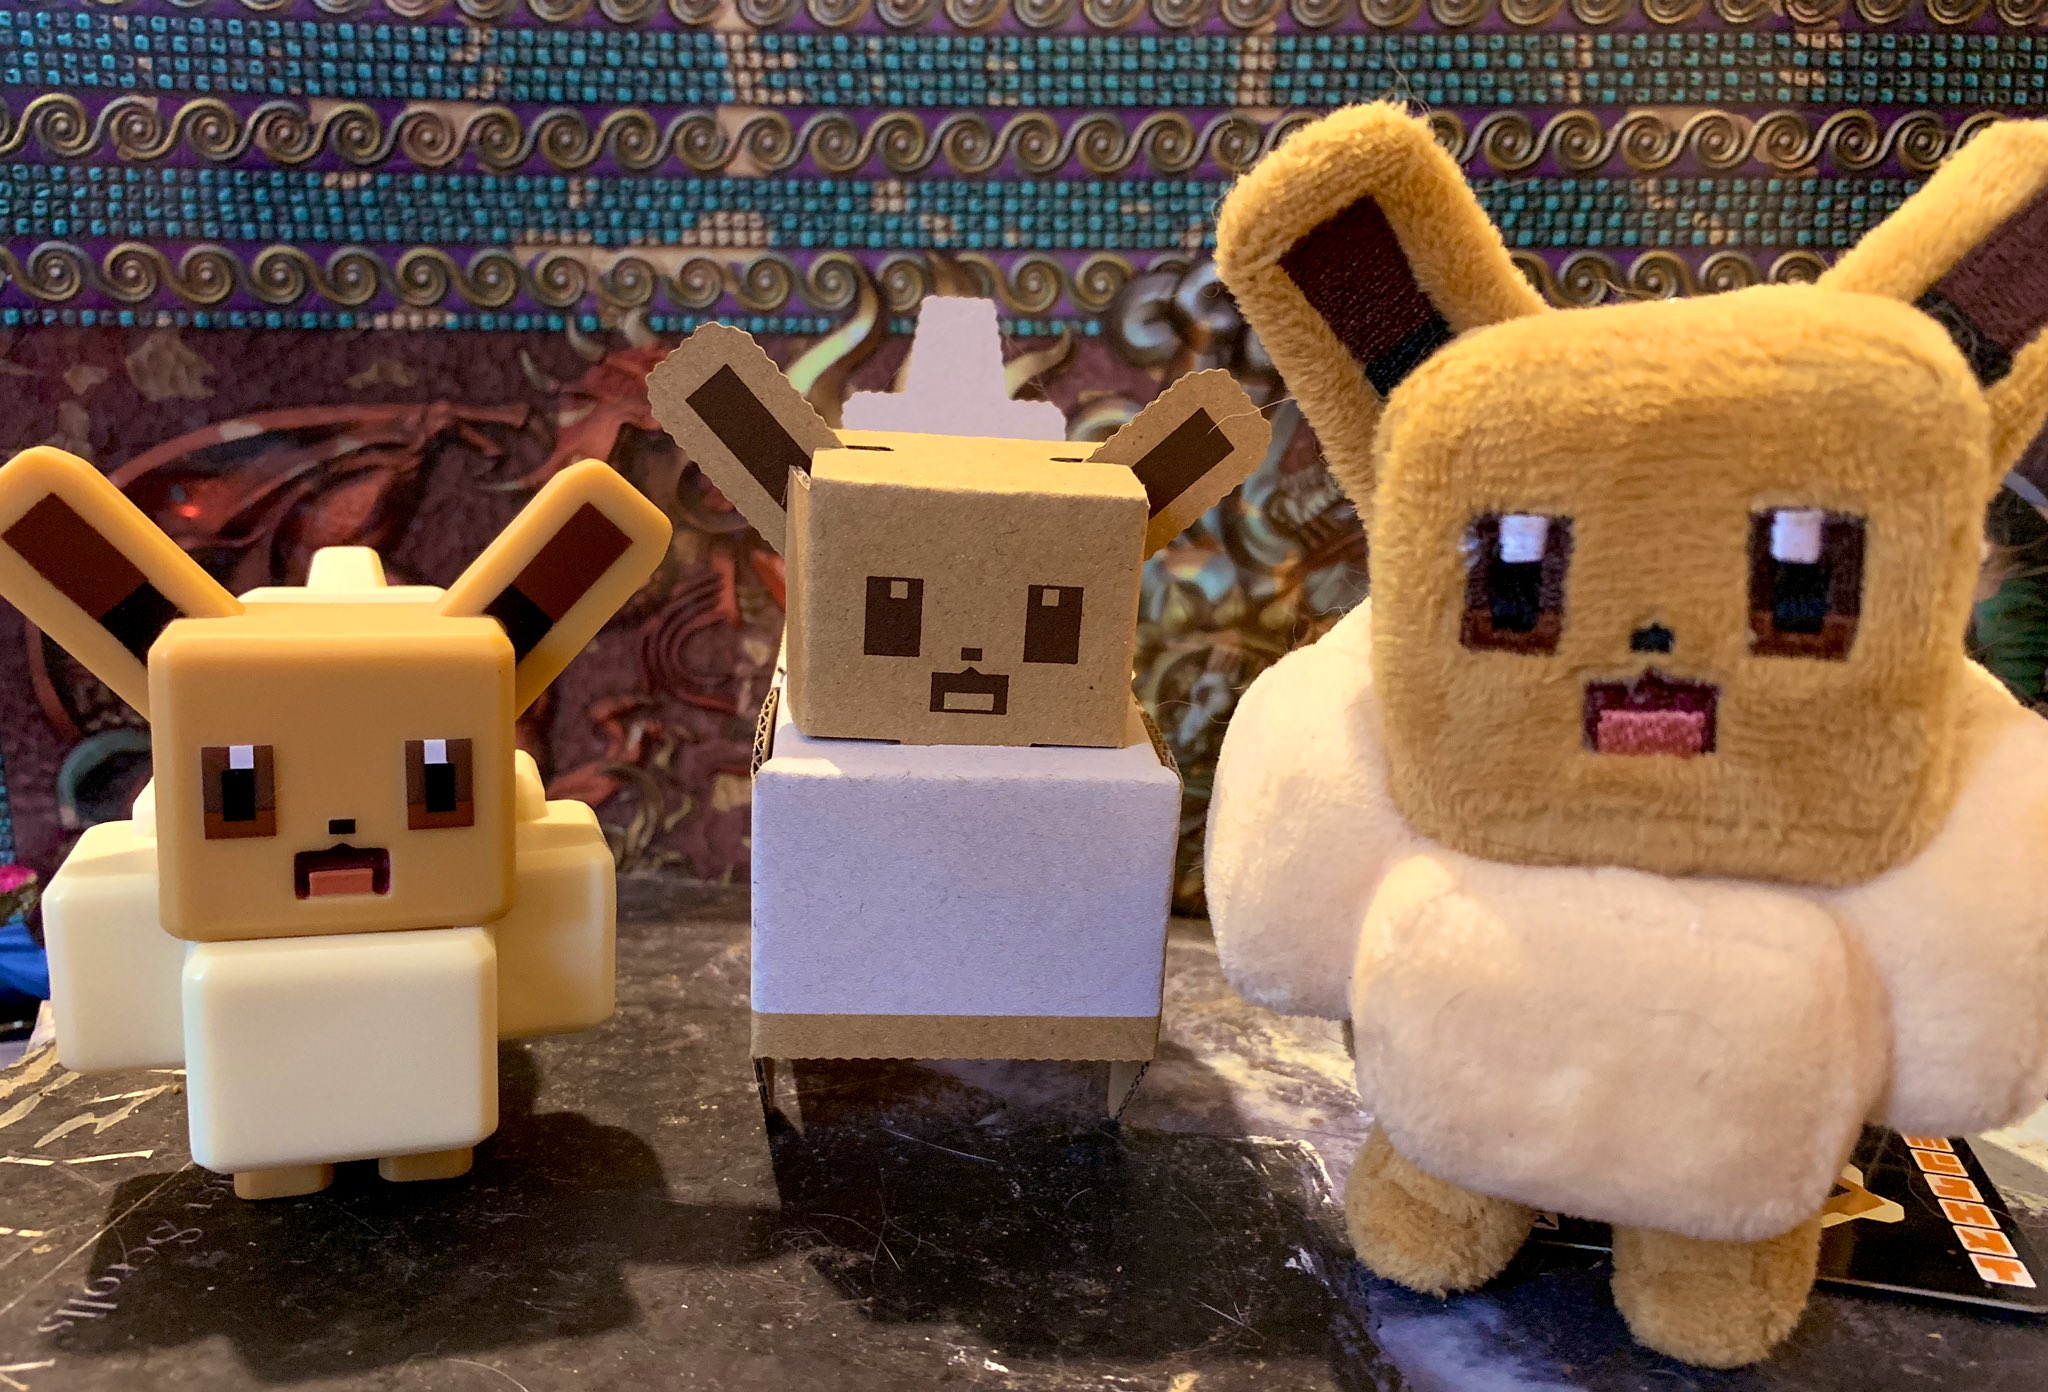 Lilly the Otomaiden X પર: Got two new Pokémon Quest Eevee today! (Plush is  old, from when PQ first came out!) #Pokemon #TeamEevee #PokemonQuest   / X